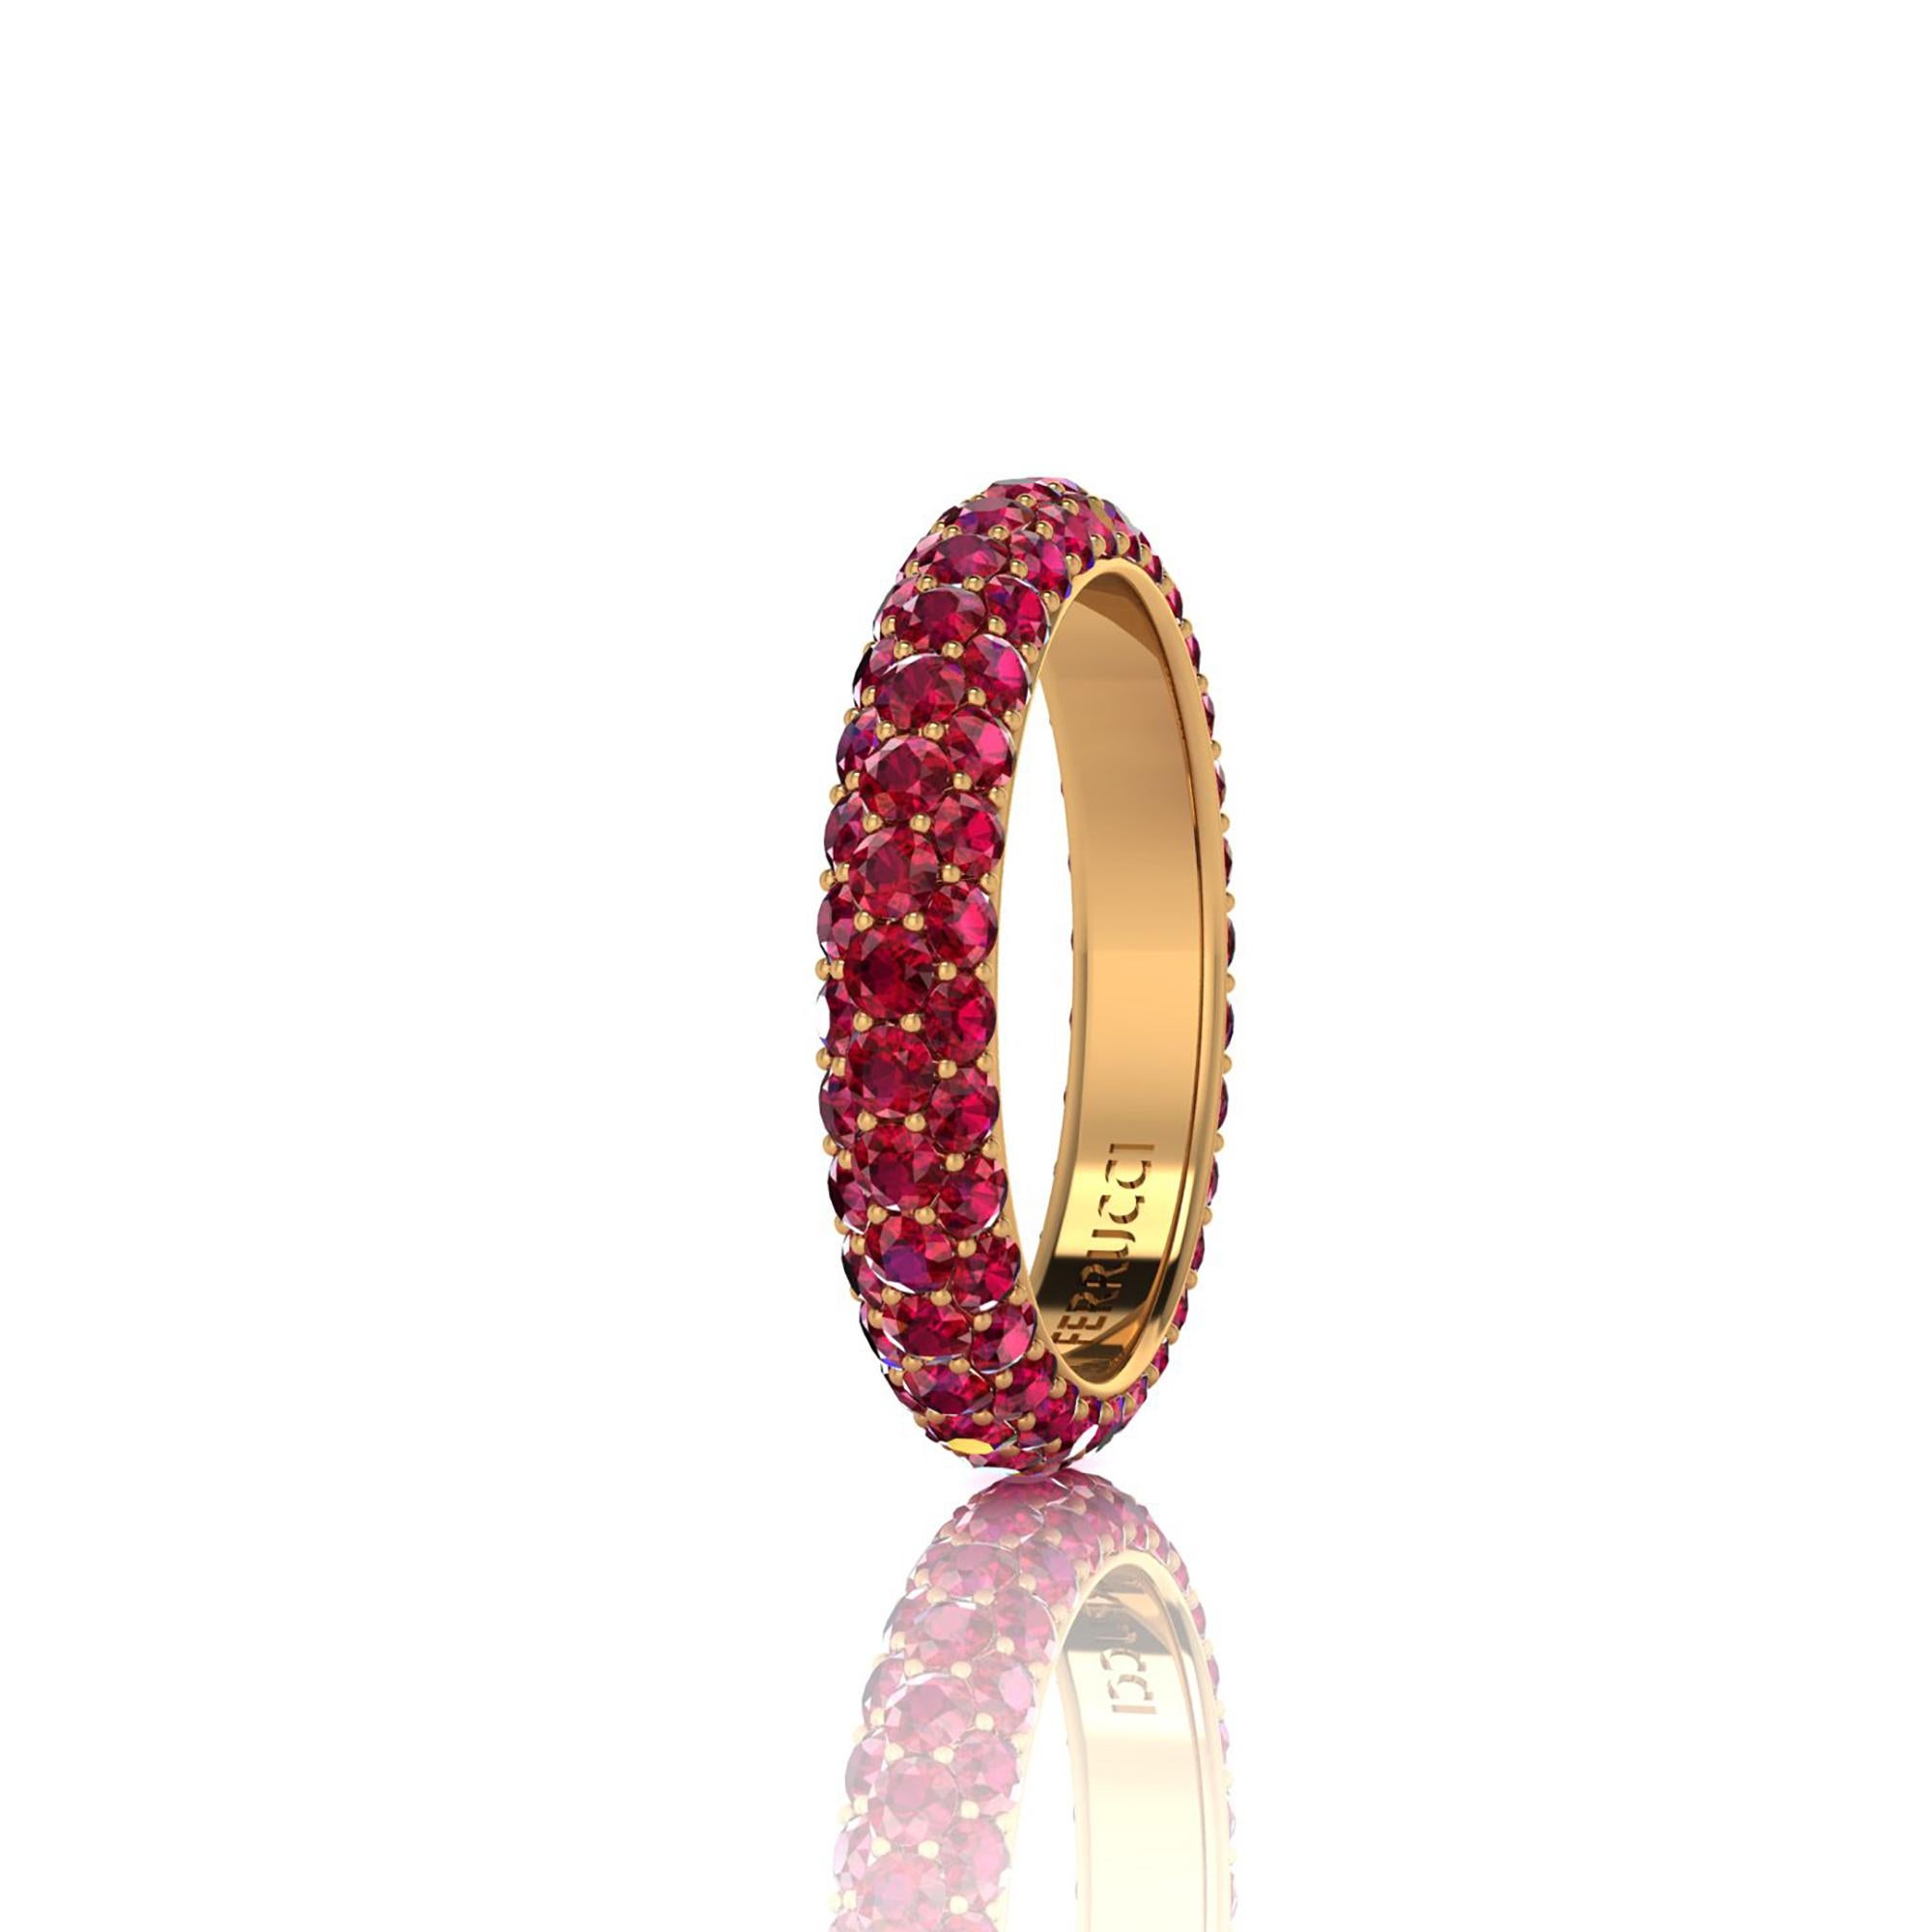  Ruby eternity ring,  an approximate total carat weight of 2 carat, hand made in New York City with the best Italian craftsmanship, conceived in 18k yellow gold.
Classic, sophisticated, gorgeous look, everlasting in time.
This is a Ring size 7 we